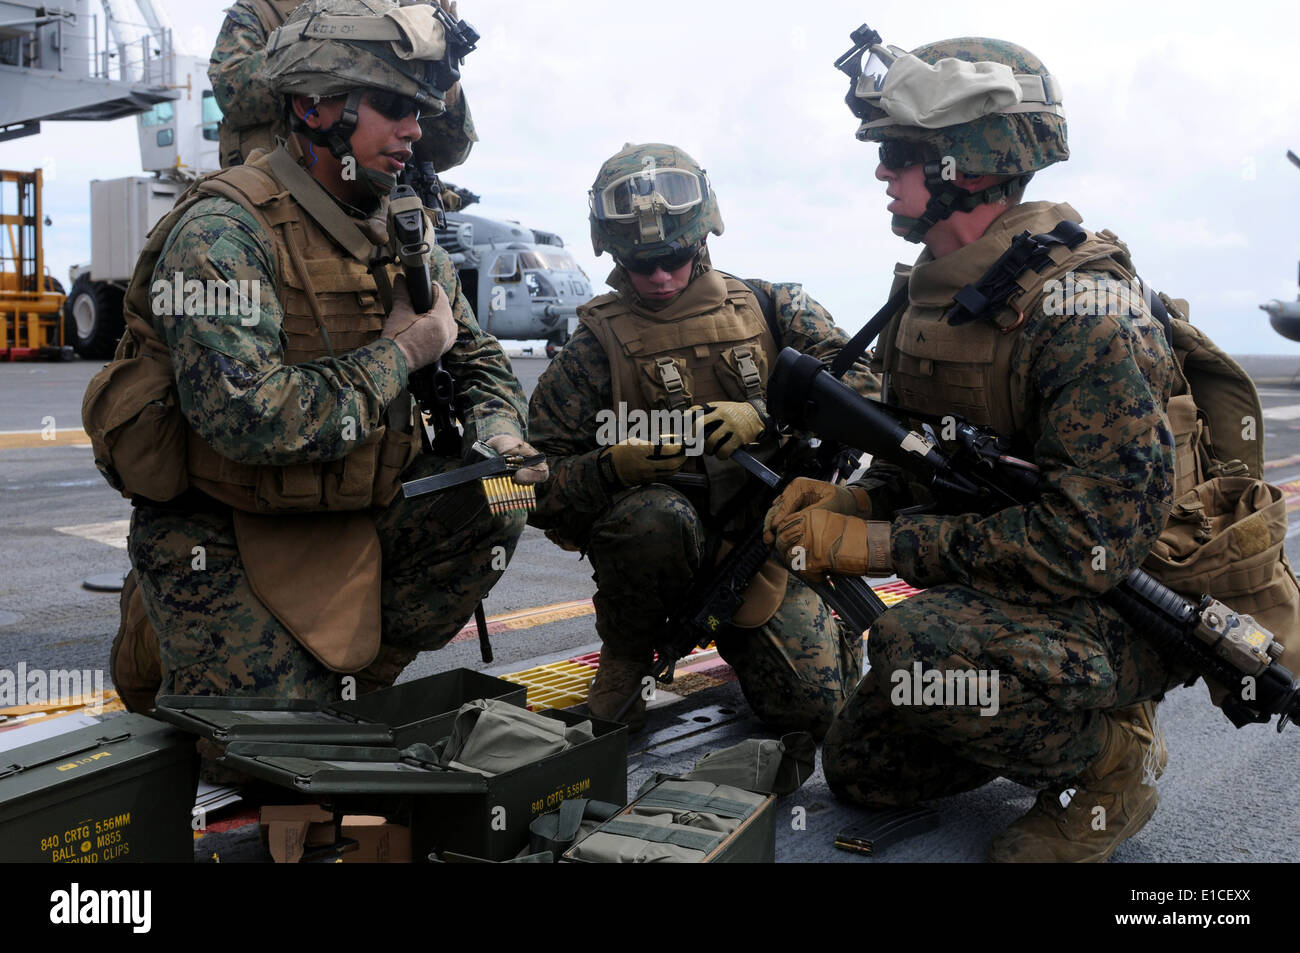 U.S. Marines load ammunition prior to conducting live-fire small arms training on the flight deck of the multipurpose amphibiou Stock Photo